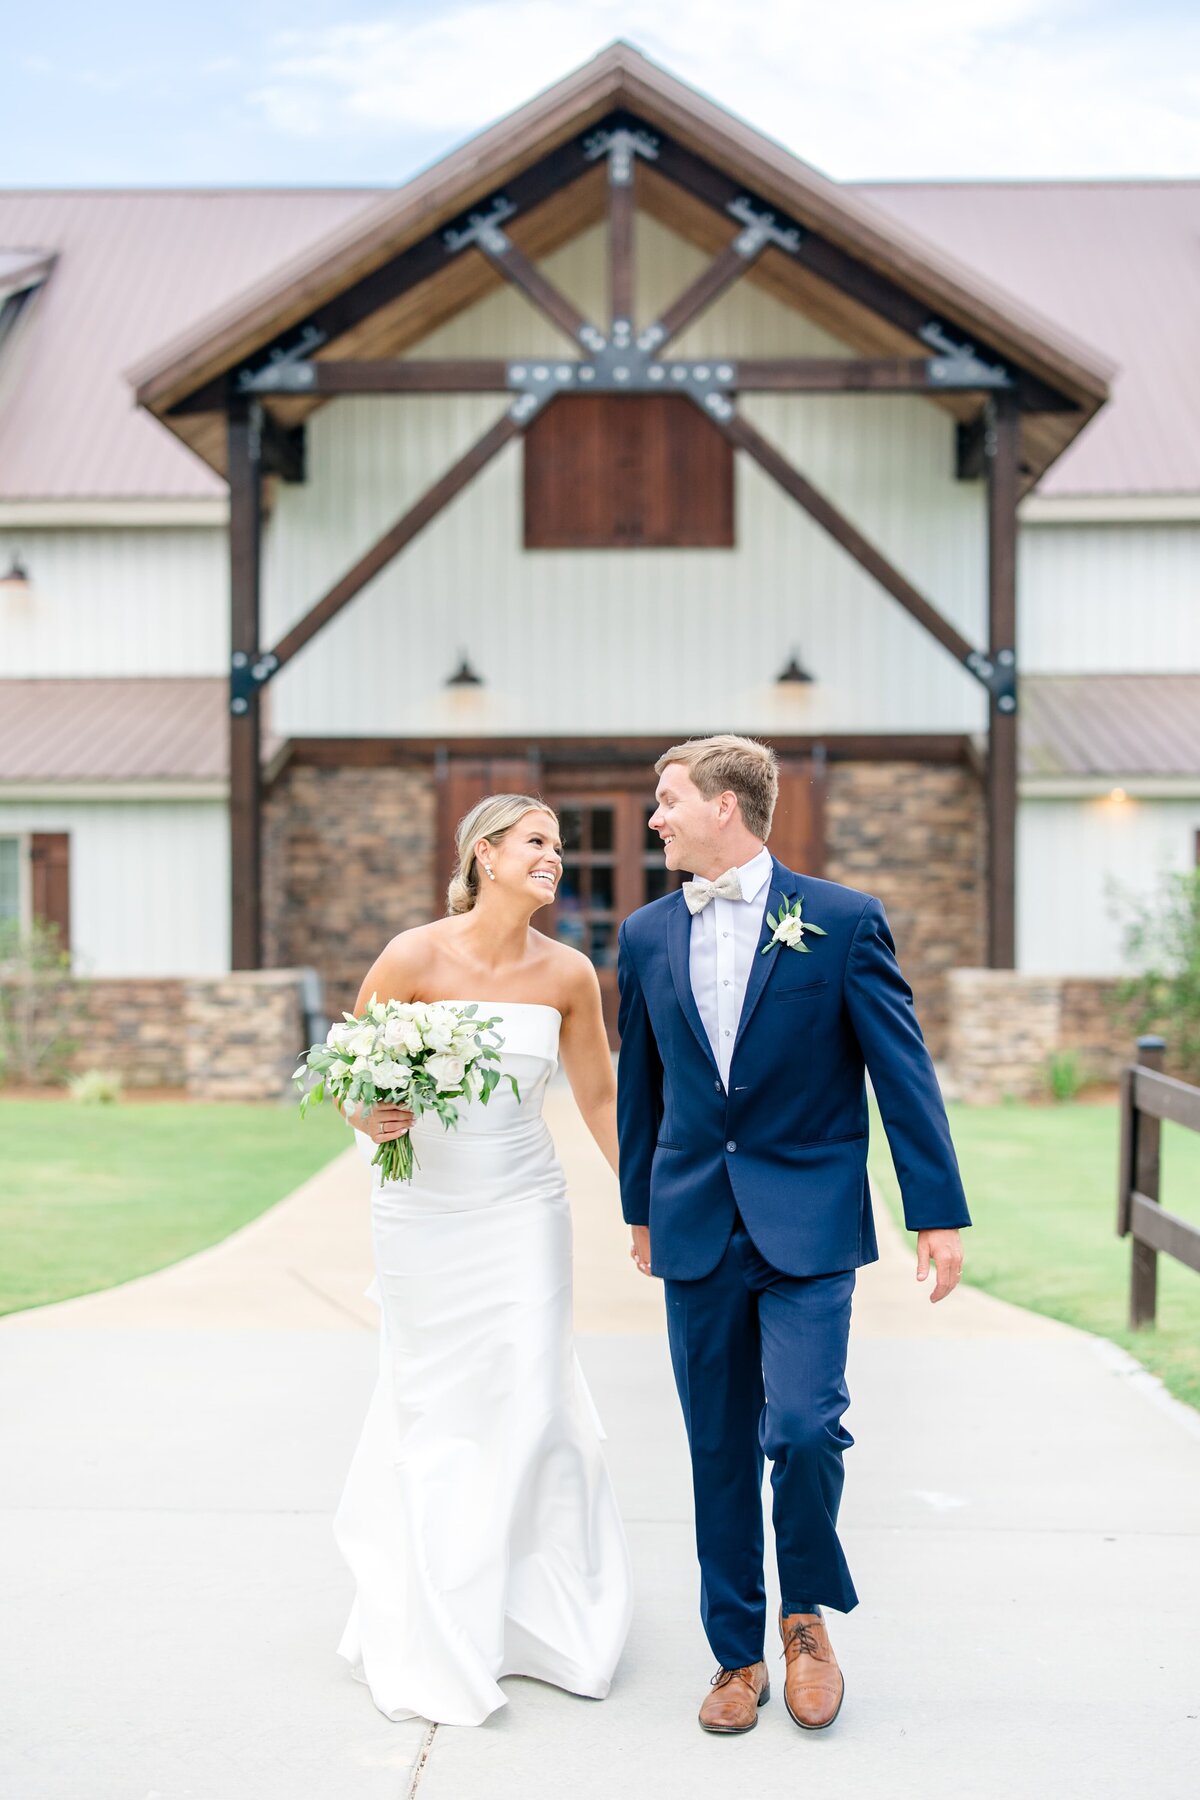 katie_and_alec_wedding_photography_wedding_videography_birmingham_alabama_husband_and_wife_team_photo_video_weddings_engagement_engagements_light_airy_focused_on_marriage__legacy_at_serenity_farms_wedding_79